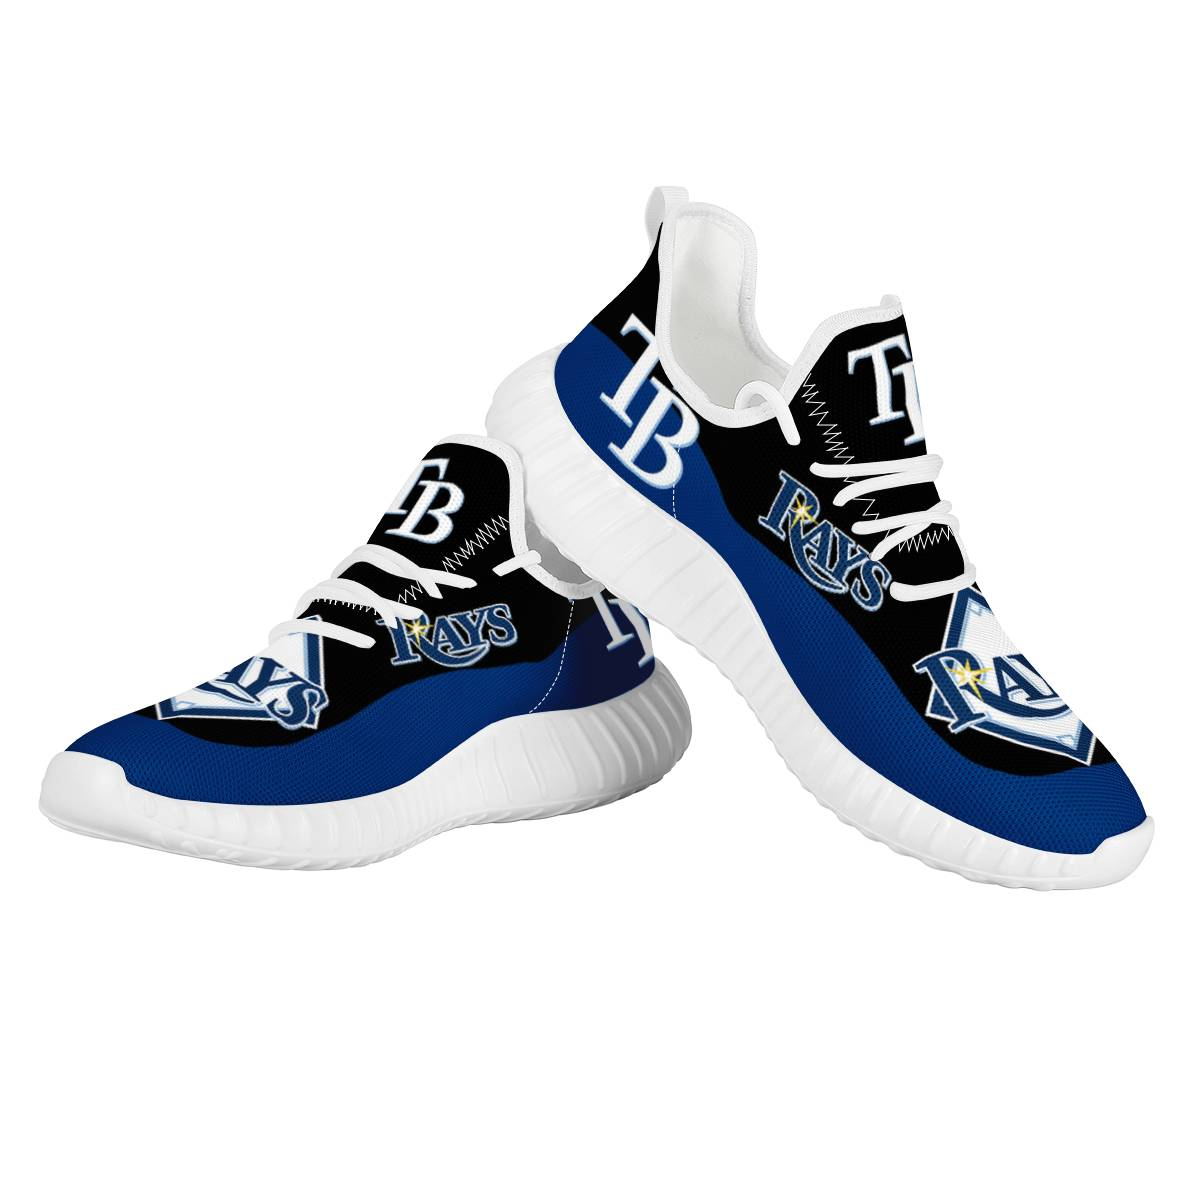 Men's Tampa Bay Rays Mesh Knit Sneakers/Shoes 002